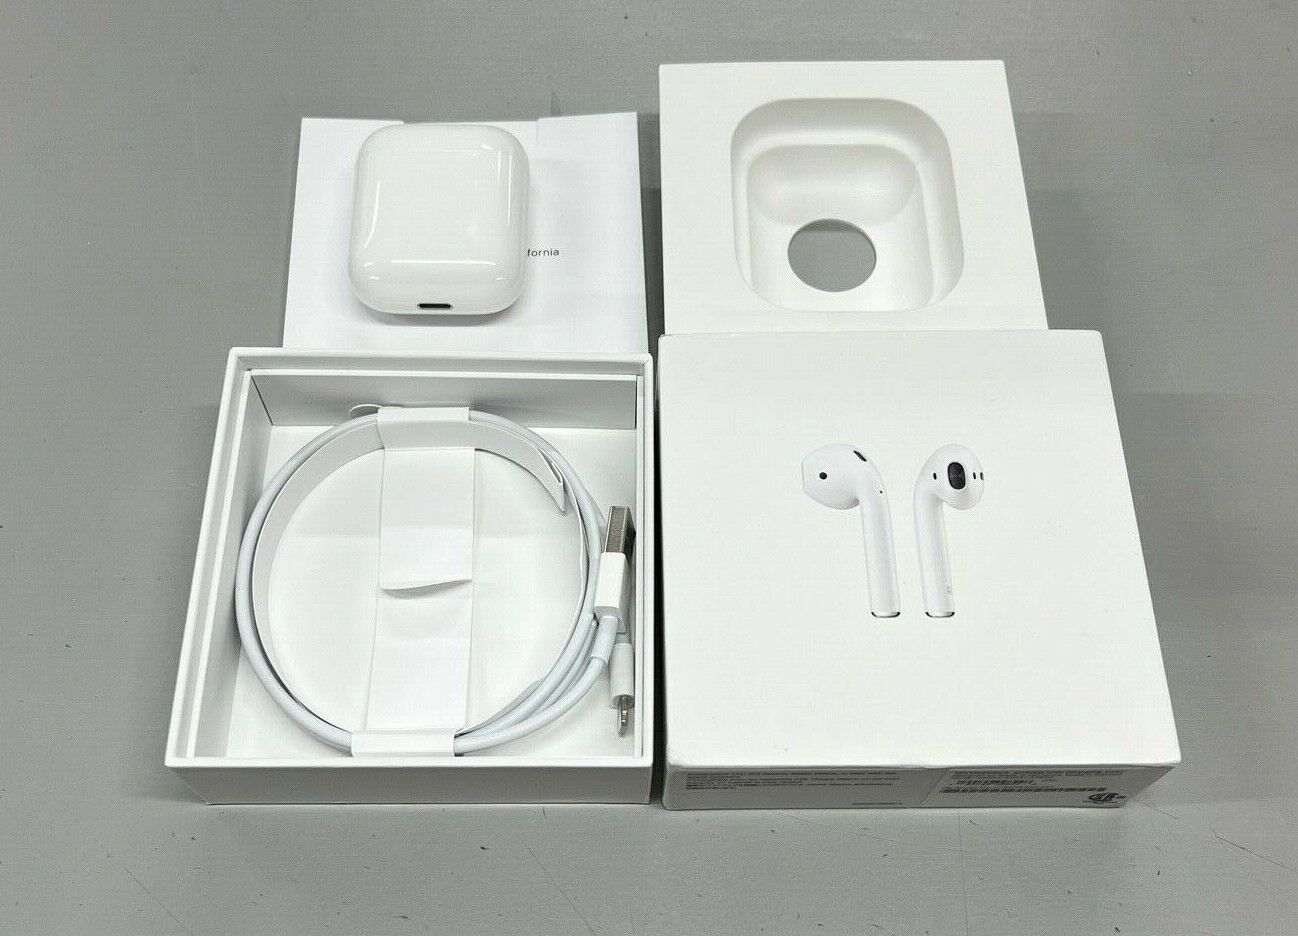 På forhånd Foresee grill Apple AirPods 2nd Generation with Charging Case - White MV7N2AM/A  703669904817 | eBay